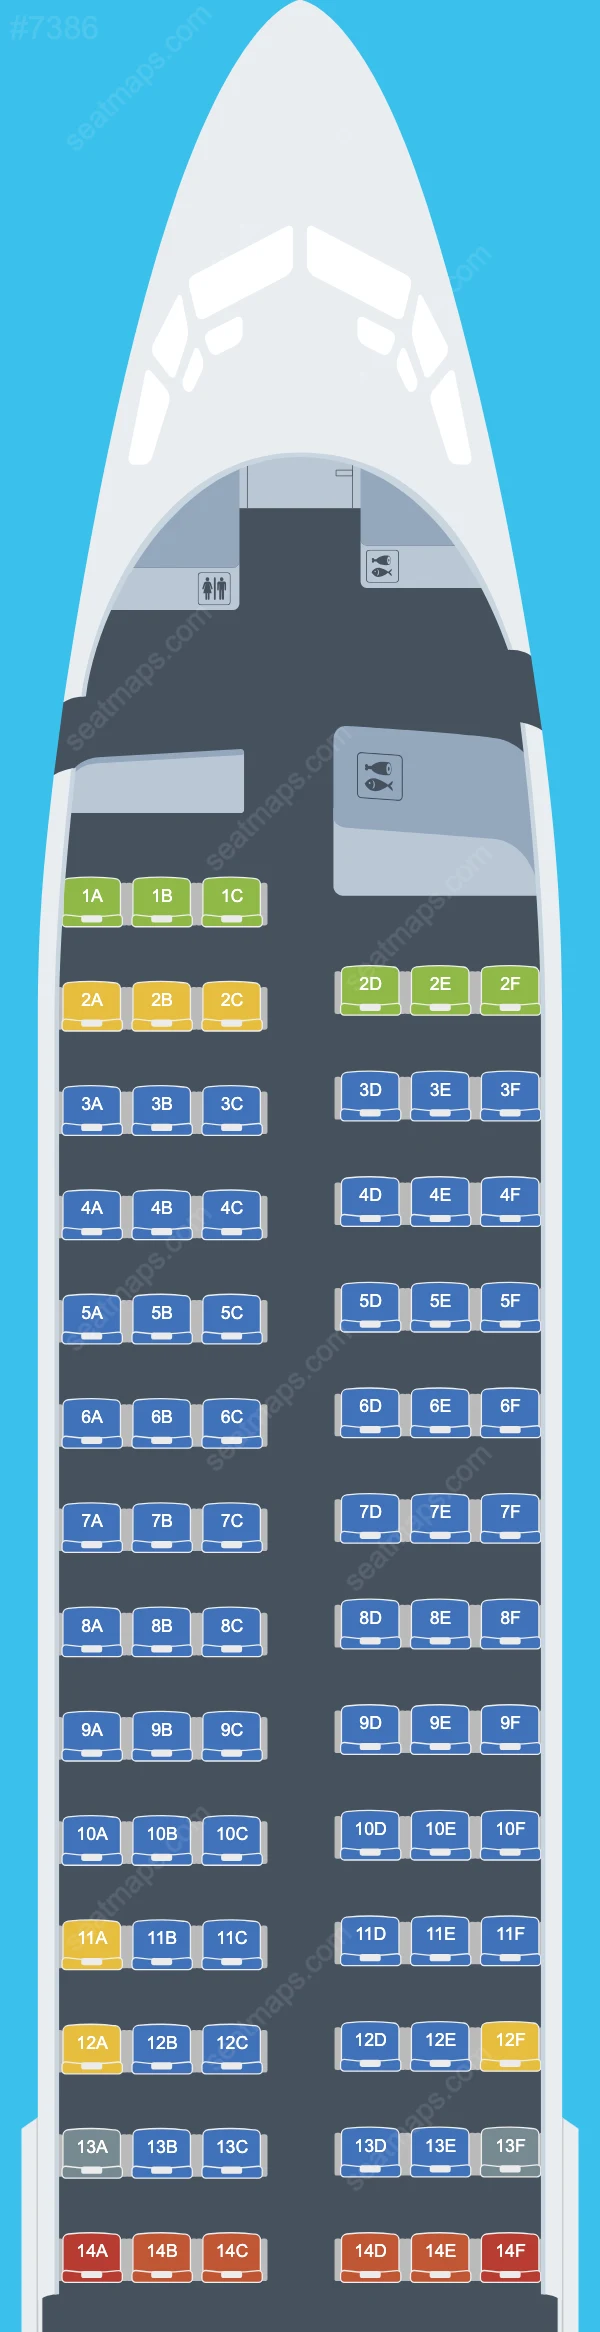 Ruili Airlines Boeing 737 Seat Maps 737-800 V.2